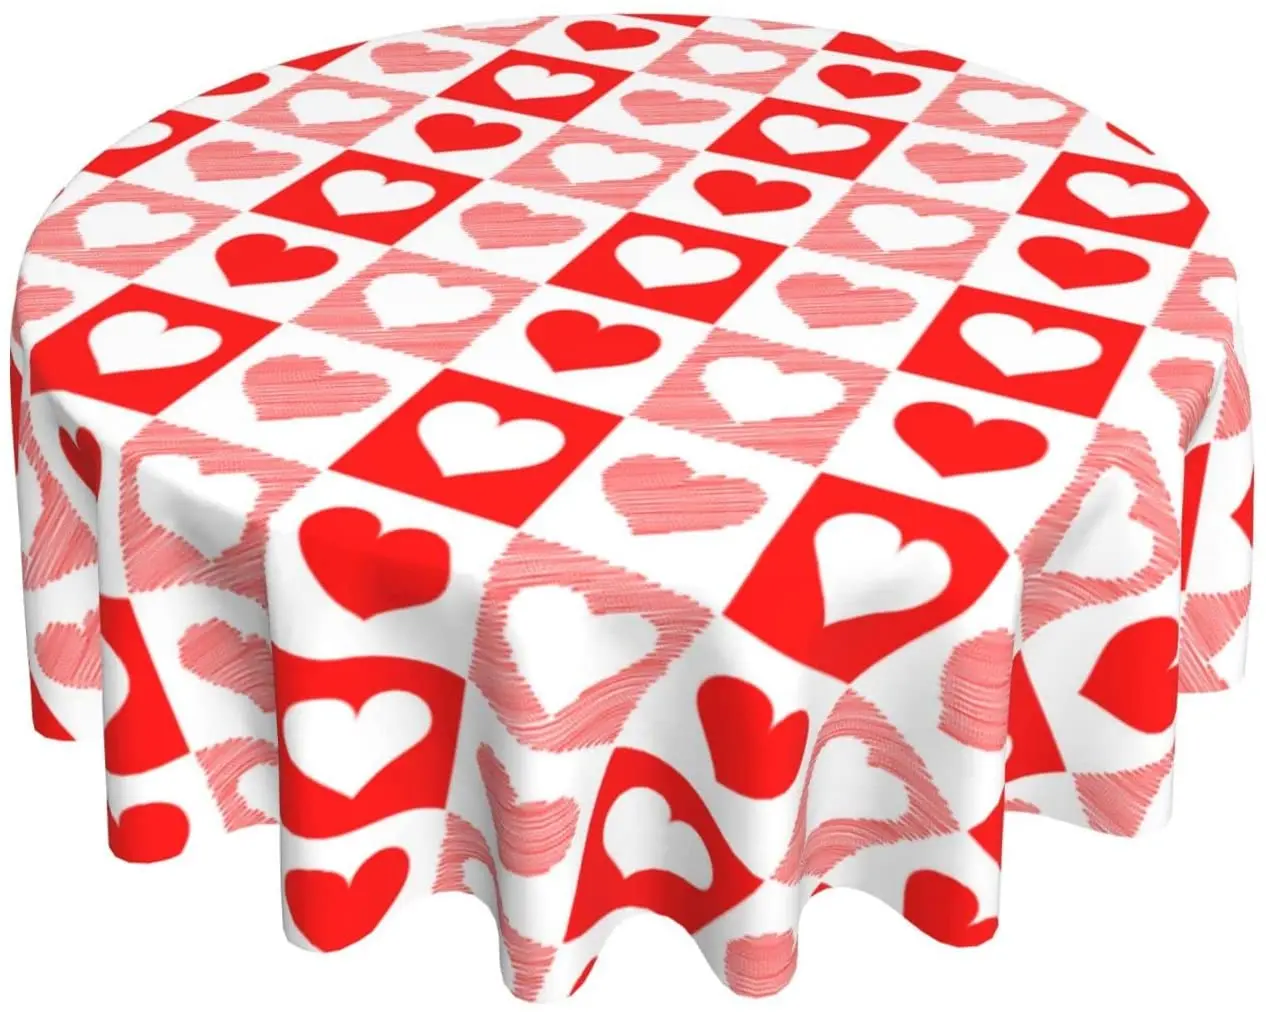 

Valentine's Day Love Heart Red Buffalo Plaid Round Tablecloth 60 Inch Romantic Tablecloths for Waterproof Polyester Table Cover